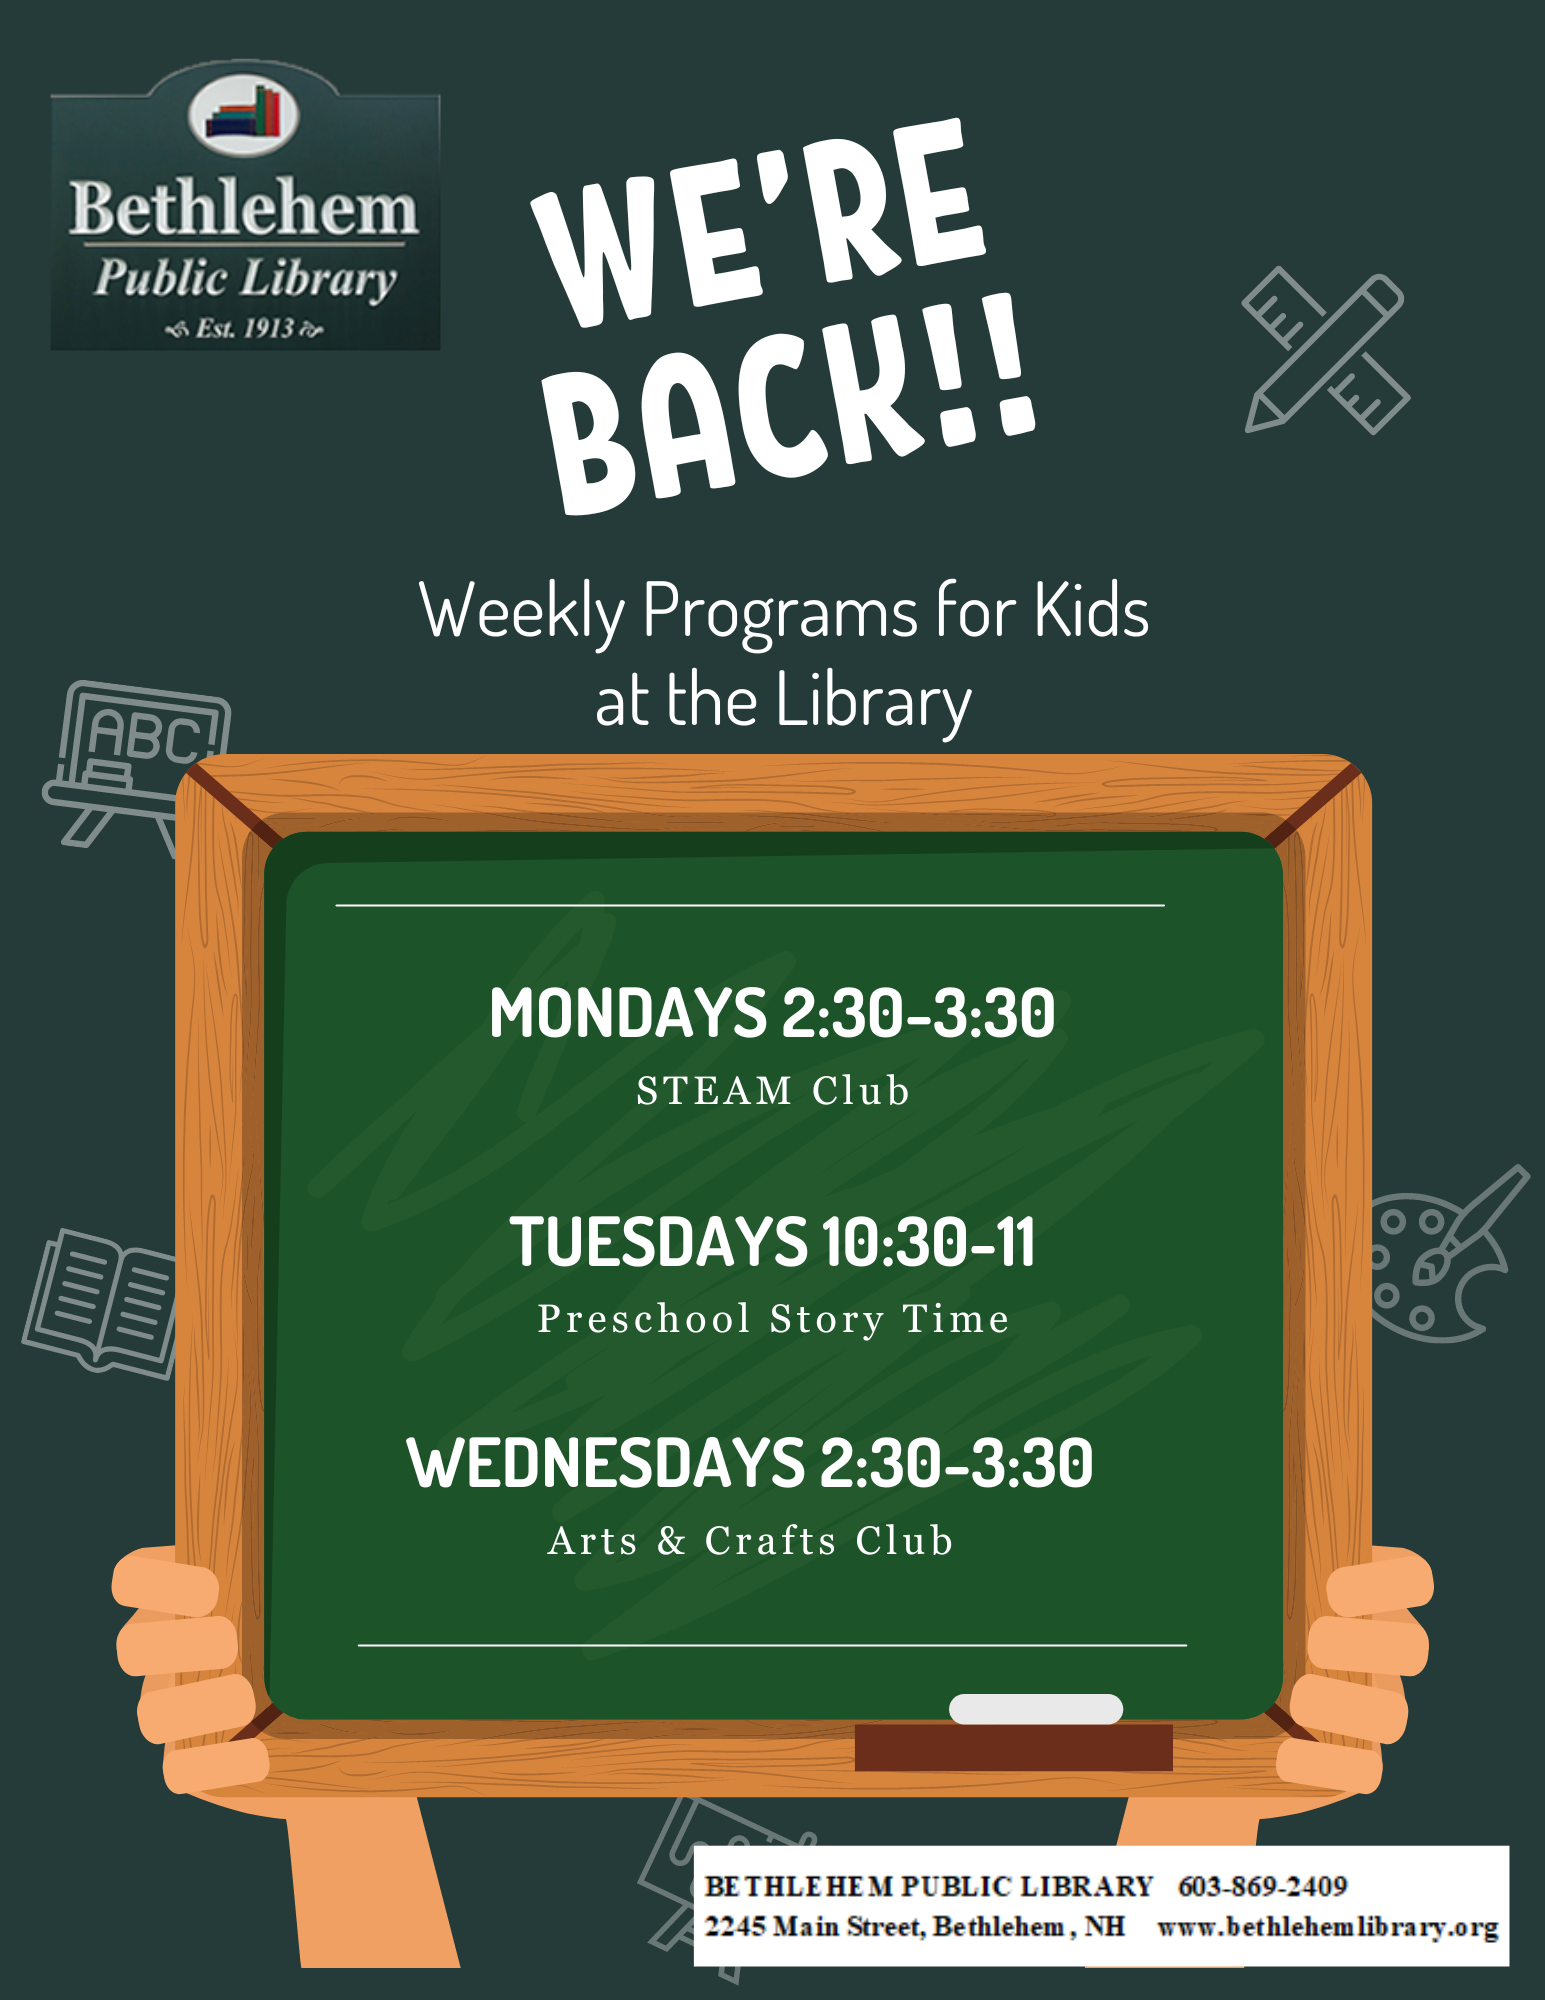 We're Back! Weekly programs for kids at the library.  Mondays 2:30-3:30 STEAM club, Tuesdays 10:30-11 Preschool Story Time, Wednesdays 2:30-3:30 Arts & Crafts Club